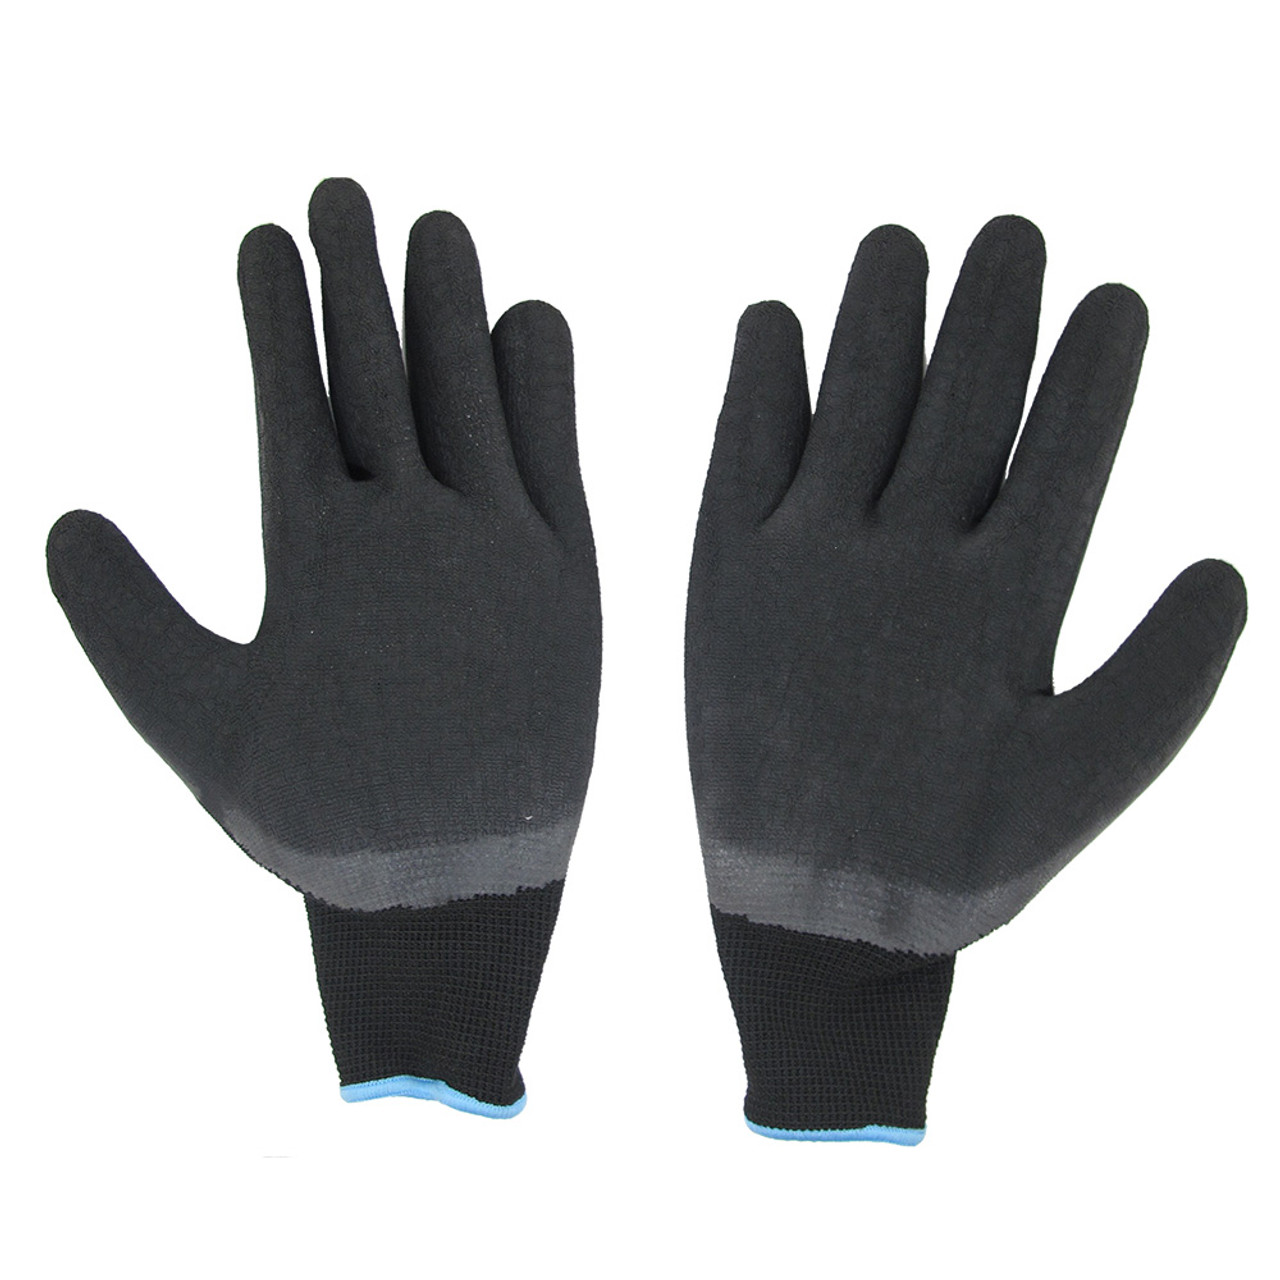 Scuba Choice Nylon Knitted 2mm Rubber Coated Palm Comfort Gloves, S/M